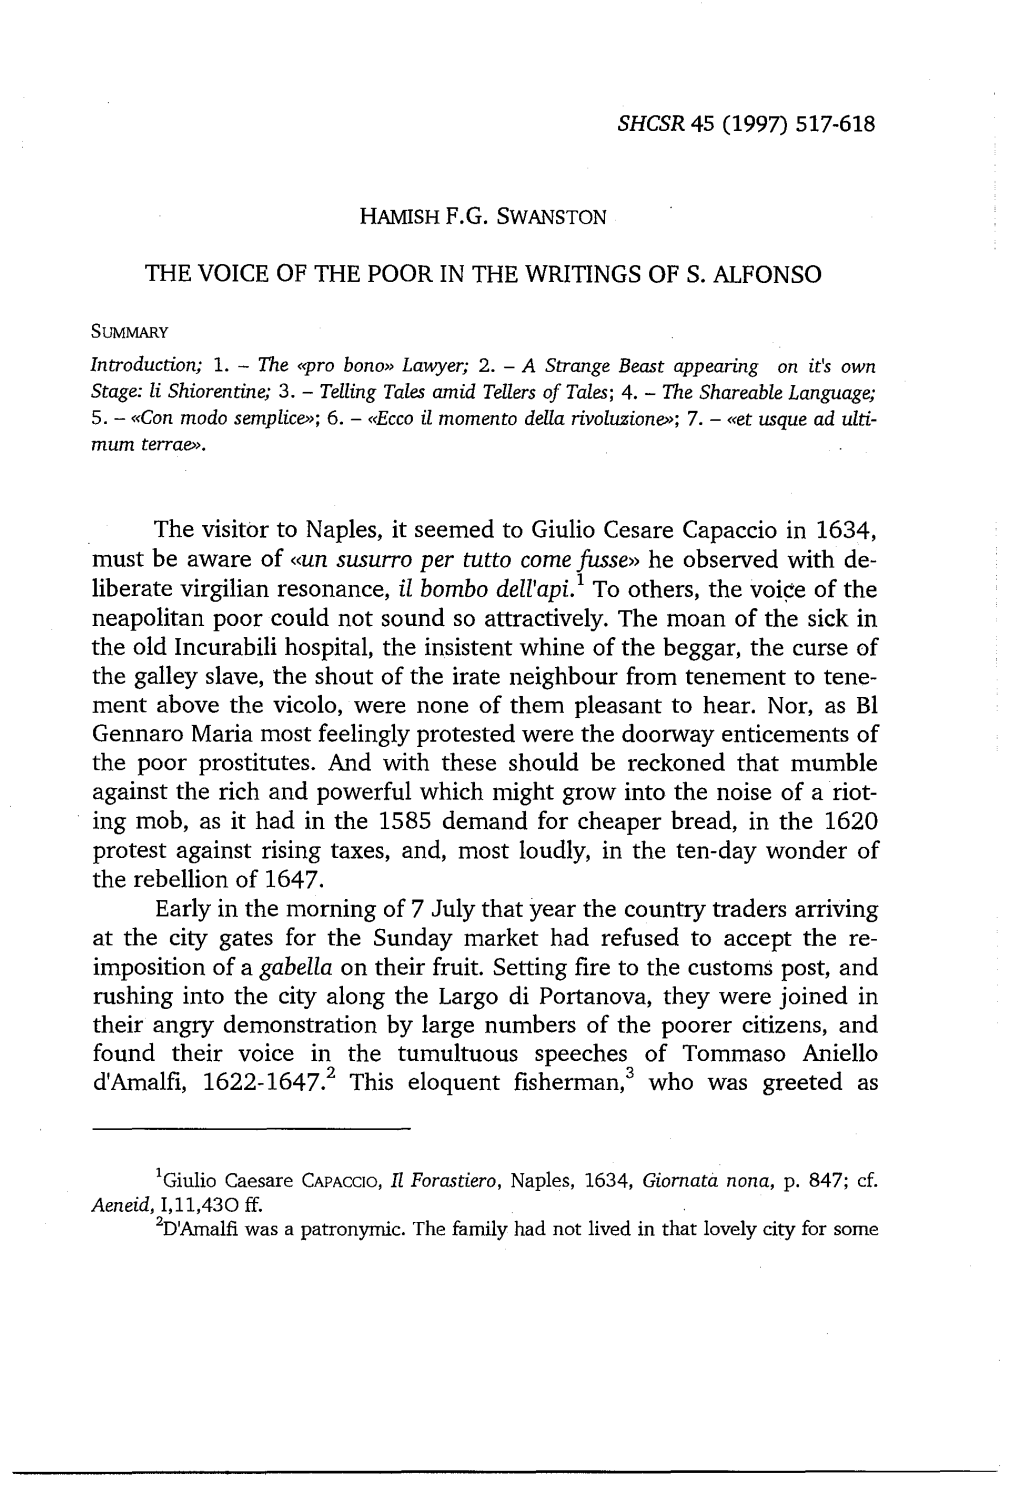 THE VOICE of the POOR in the WRITINGS of S. ALFONSO The